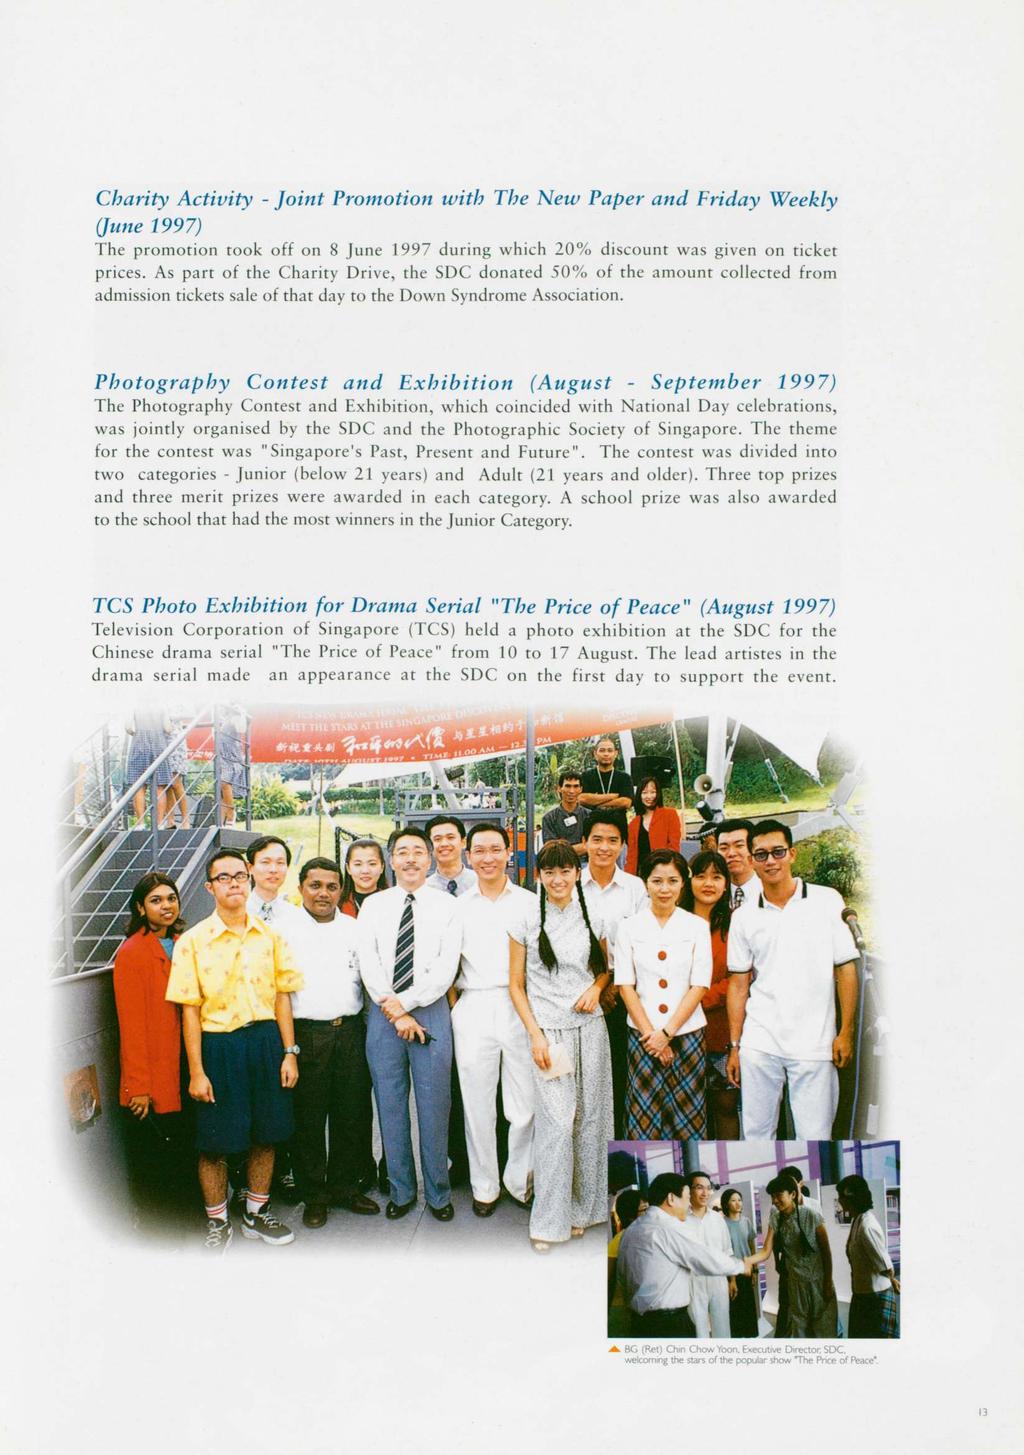 Charity Activity - Joint Promotion with The New Paper and Friday Weekly (June 1997) The promotion took off on 8 June 1997 during which 20% discount was given on ticket prices.